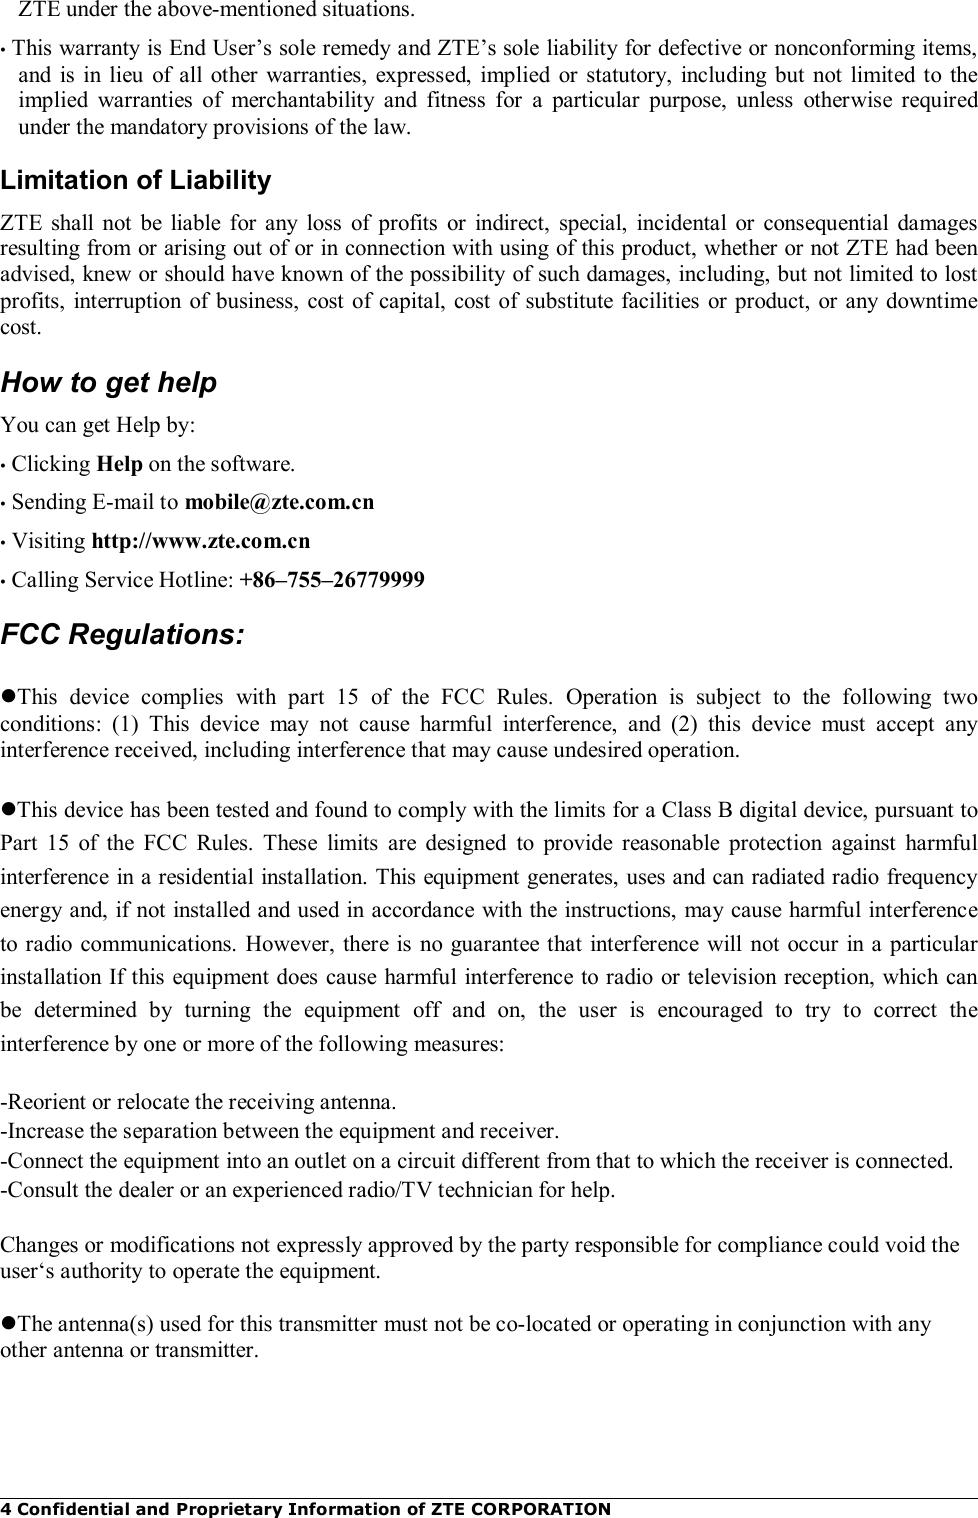 4 Confidential and Proprietary Information of ZTE CORPORATION ZTE under the above-mentioned situations. • This warranty is End User’s sole remedy and ZTE’s sole liability for defective or nonconforming items, and  is in  lieu  of all  other warranties,  expressed,  implied  or statutory,  including but  not  limited  to  the implied  warranties  of  merchantability  and  fitness  for  a  particular  purpose,  unless  otherwise  required under the mandatory provisions of the law. Limitation of Liability ZTE  shall  not  be  liable  for  any  loss  of profits  or  indirect,  special,  incidental  or  consequential  damages resulting from or arising out of or in connection with using of this product, whether or not ZTE had been advised, knew or should have known of the possibility of such damages, including, but not limited to lost profits, interruption of business, cost of capital, cost of substitute facilities or product, or any downtime cost. How to get help You can get Help by: • Clicking Help on the software. • Sending E-mail to mobile@zte.com.cn • Visiting http://www.zte.com.cn • Calling Service Hotline: +86–755–26779999 FCC Regulations:  This  device  complies  with  part  15  of  the  FCC  Rules.  Operation  is  subject  to  the  following  two conditions:  (1)  This  device  may  not  cause  harmful  interference,  and  (2)  this  device  must  accept  any interference received, including interference that may cause undesired operation.  This device has been tested and found to comply with the limits for a Class B digital device, pursuant to Part  15  of  the  FCC  Rules.  These  limits  are  designed  to  provide  reasonable  protection  against  harmful interference in a residential installation. This equipment generates, uses and can radiated radio frequency energy and, if not installed and used in accordance with the instructions, may cause harmful interference to radio communications.  However, there is no guarantee that interference  will not occur in a particular installation If this equipment does cause harmful interference to radio or television reception, which can be  determined  by  turning  the  equipment  off  and  on,  the  user  is  encouraged  to  try  to  correct  the interference by one or more of the following measures:  -Reorient or relocate the receiving antenna. -Increase the separation between the equipment and receiver. -Connect the equipment into an outlet on a circuit different from that to which the receiver is connected. -Consult the dealer or an experienced radio/TV technician for help.  Changes or modifications not expressly approved by the party responsible for compliance could void the user‘s authority to operate the equipment.  The antenna(s) used for this transmitter must not be co-located or operating in conjunction with any other antenna or transmitter. 